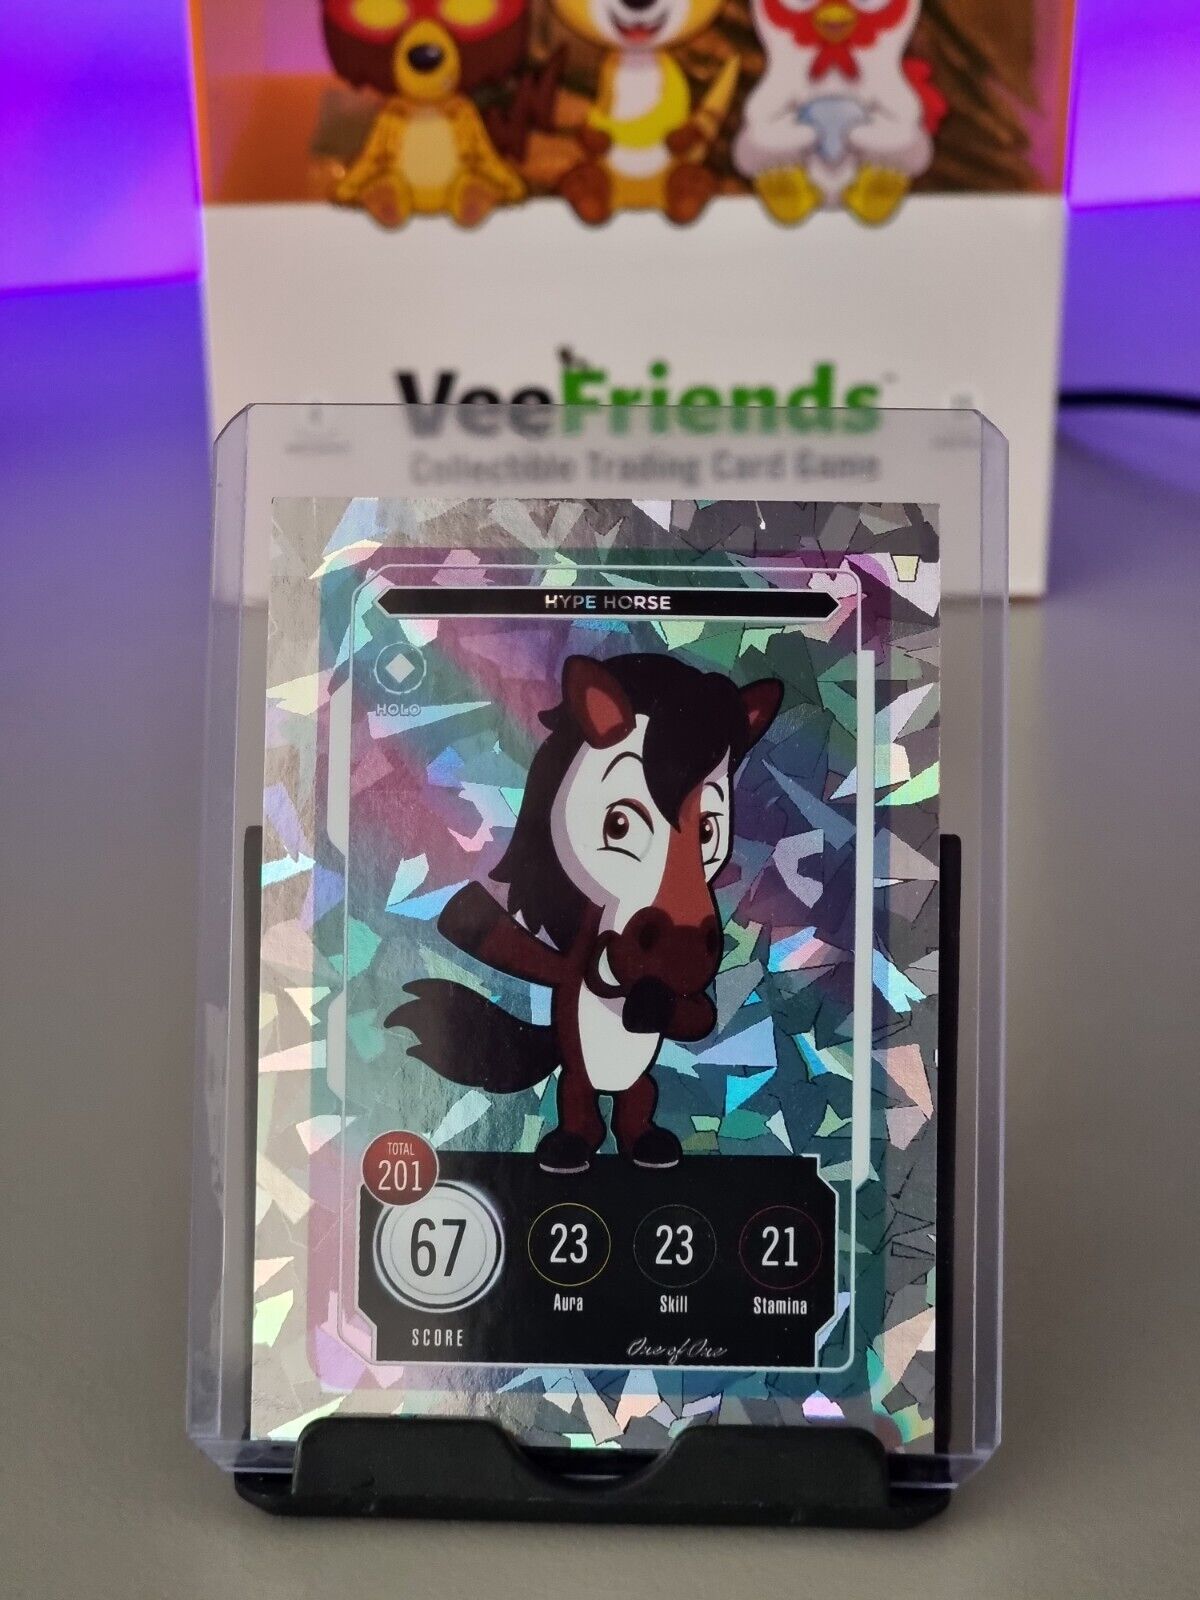 1/1 HYPE HORSE - HOLO - Veefriends Compete and Collect